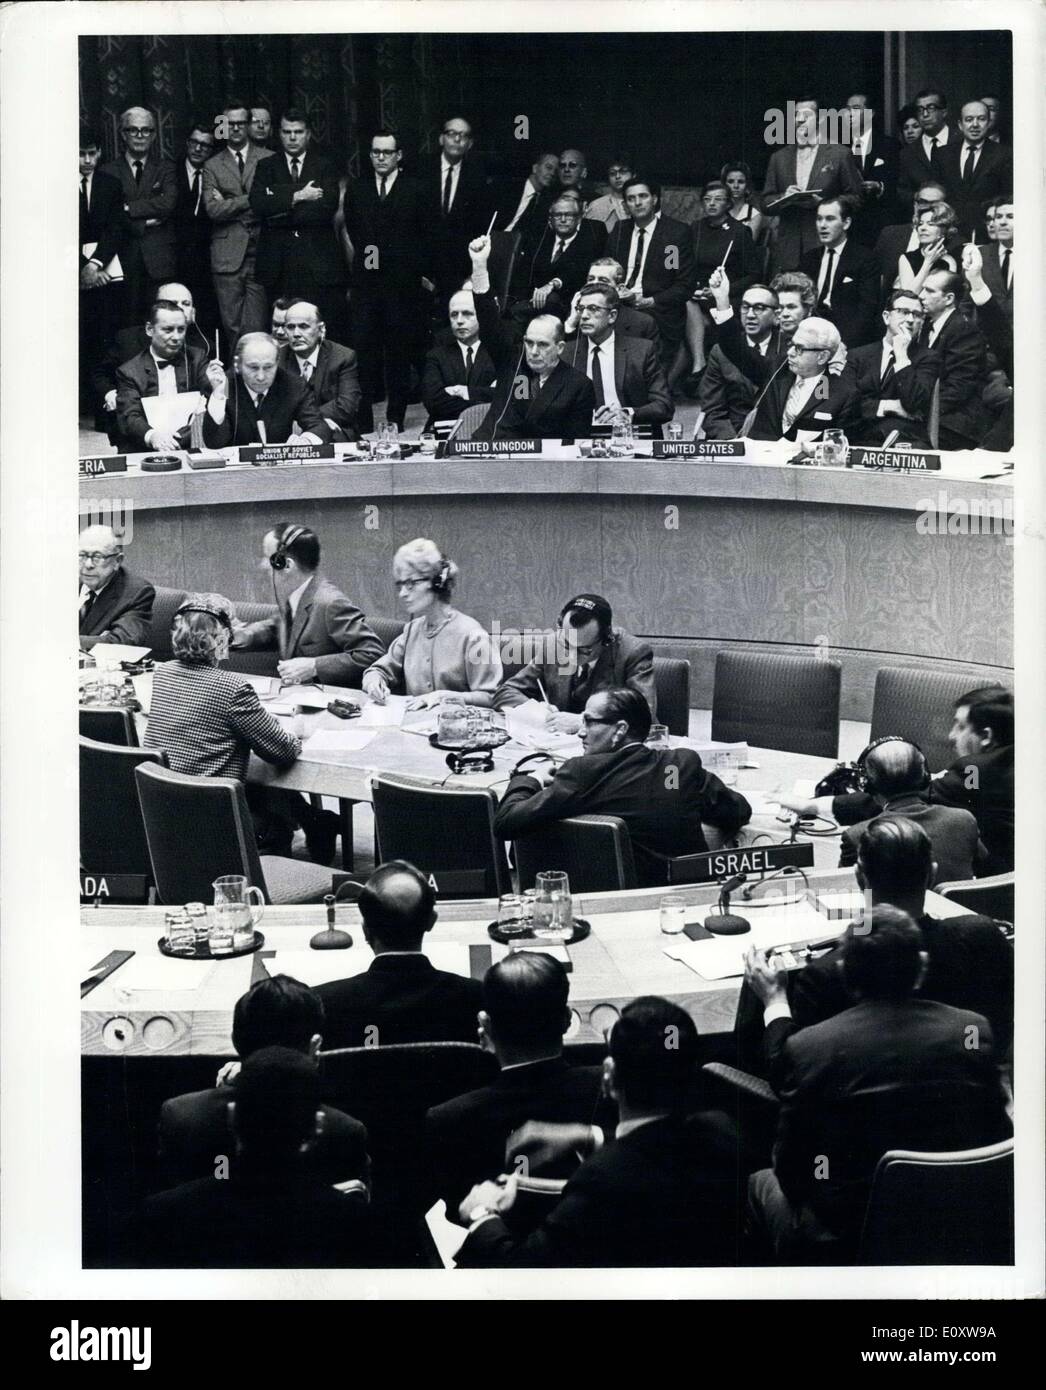 Nov. 22, 1967 - Security Council Adopts Resolution On Middle East: The Security Council today unanimously adopted a resolution affirming that the establishment of a must and lasting peace in the Middle East should include the application of the following principles: (1) Withdrawal of Israeli armed forces from terrorists occupied in the recent conflict; and (2) Termination of all claims or states of belligerency and respect for and acknowledgment of the sovereigntyy, territorial integrity and political independence of every State in the area and their right to live in peace within secure and Stock Photo